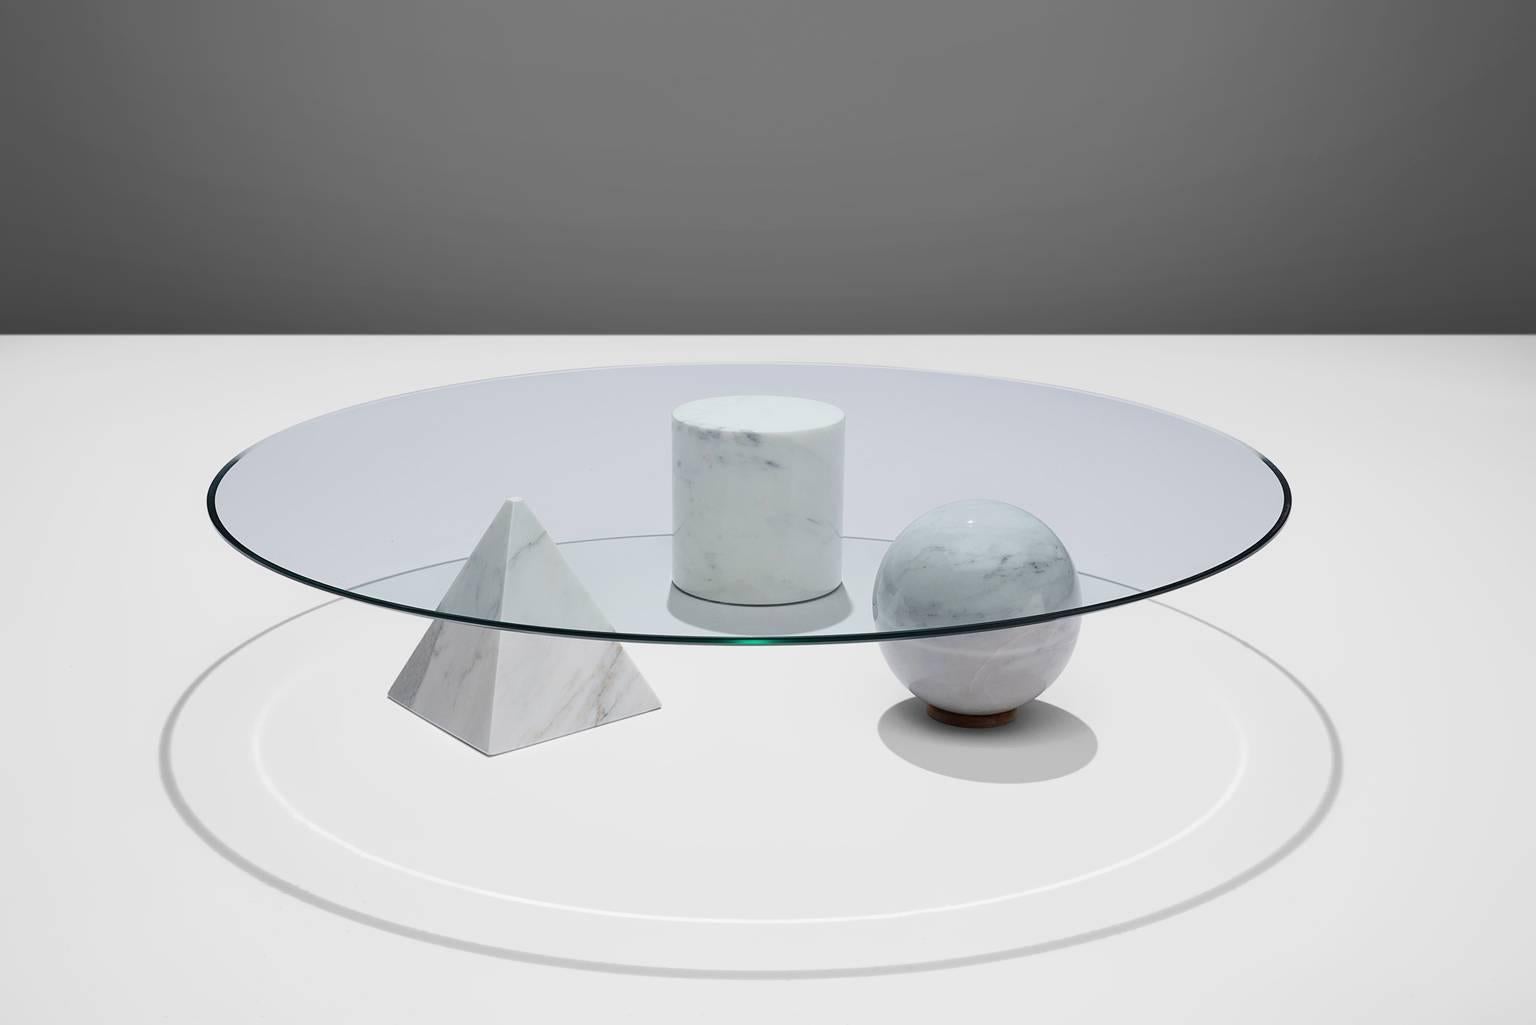 Lella and Massimo Vignelli, 'Metafora' cocktail table, glass and marble, Italy, 1970s.

This variation on the square Metafora table is designed by Lella and Massimo Vignelli. This table combined out of three geometric shapes: a cylinder, a ball,